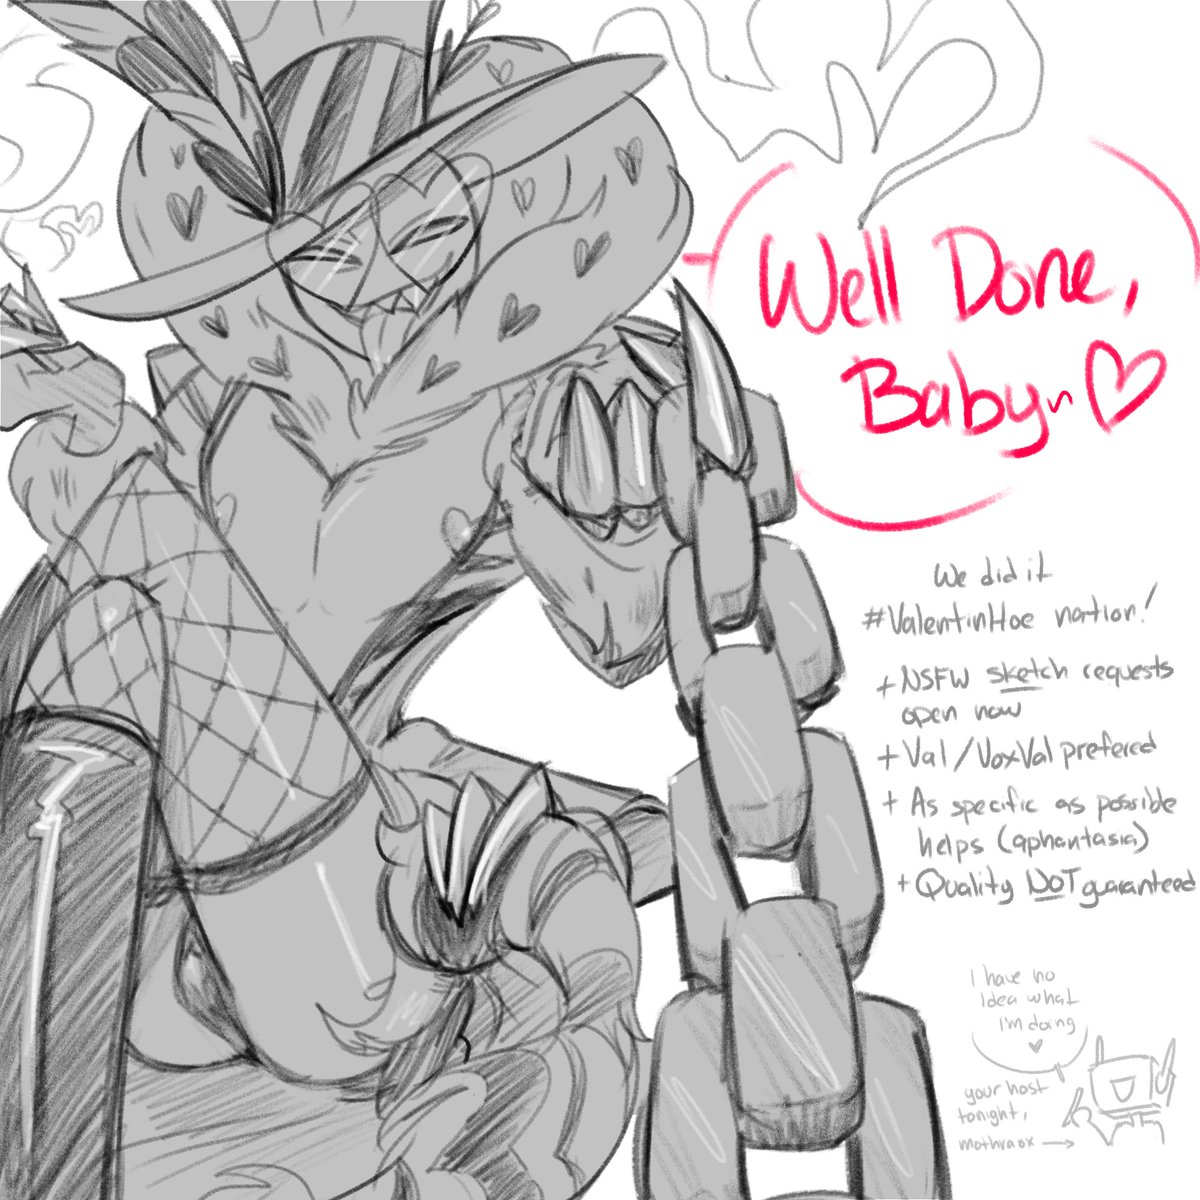 LET'S GO!! 🥂🥂 I've been very shy to post NSFW on this account and IT'S TIME TO CHANGE THAT. Opening nsfw sketch request now!! (pls dont expect much i'm n00b ktnx) #ValentinHoe #HazbinHotelValentino #VoxVal #StaticMoth #Requests